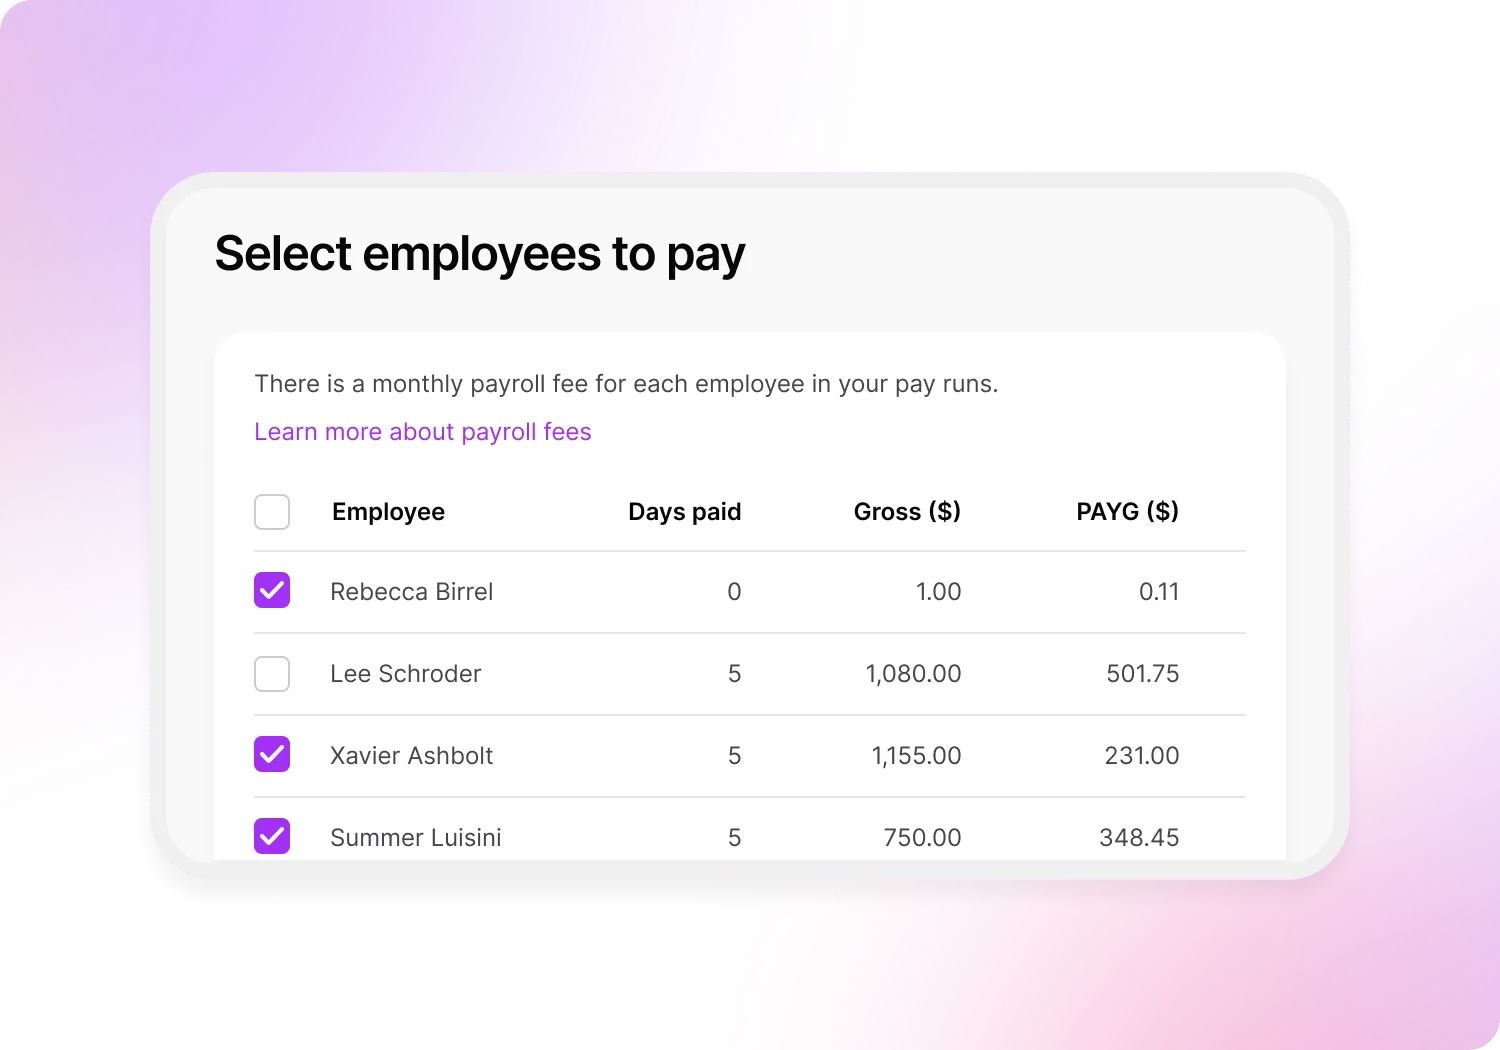 MYOB Business allows you to check the box to select which employees to pay. 